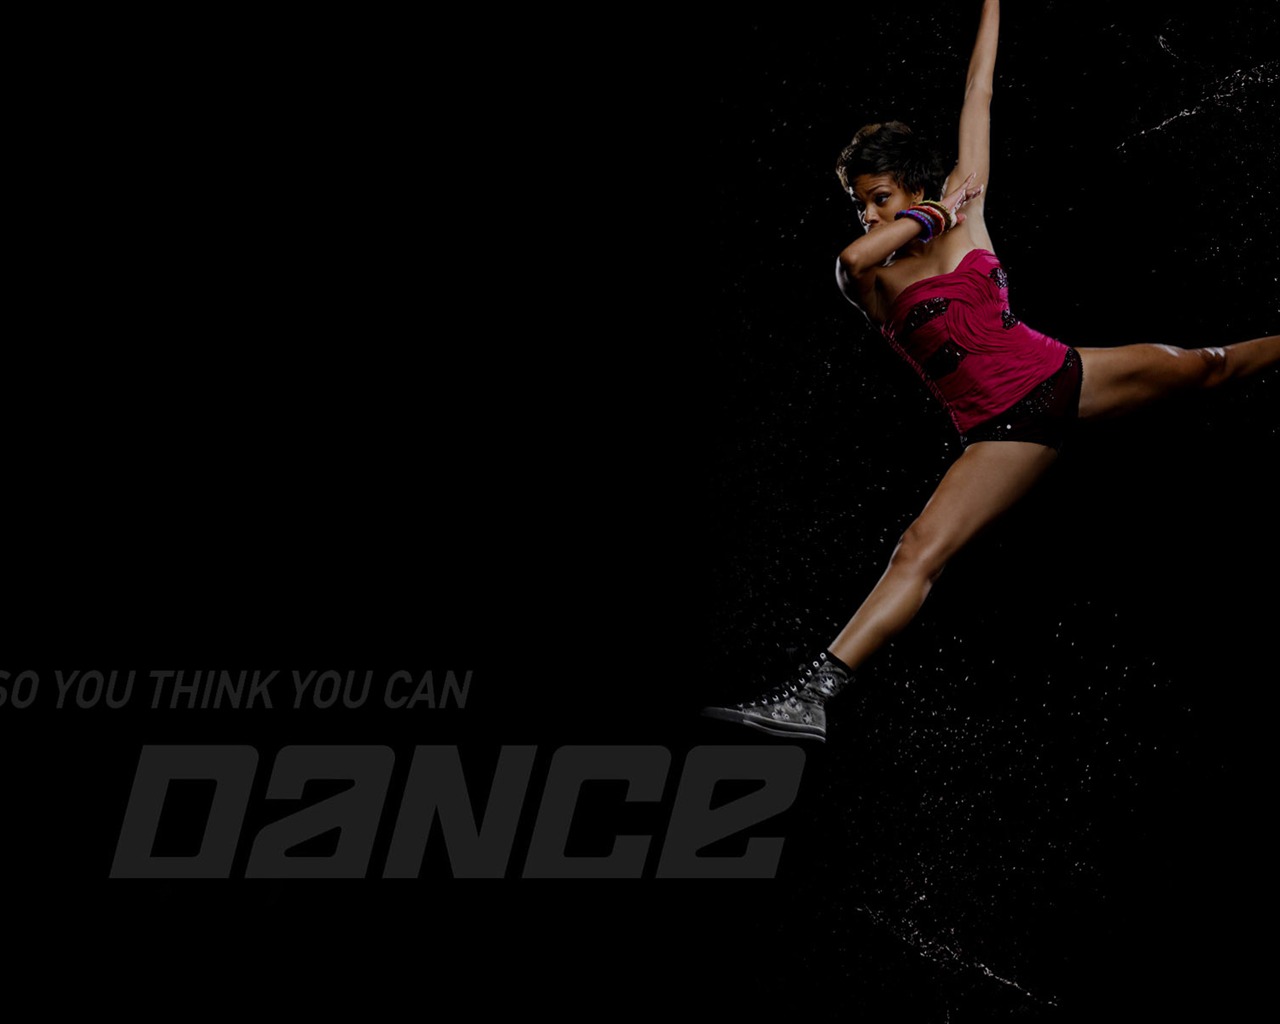 So You Think You Can Dance wallpaper (2) #15 - 1280x1024